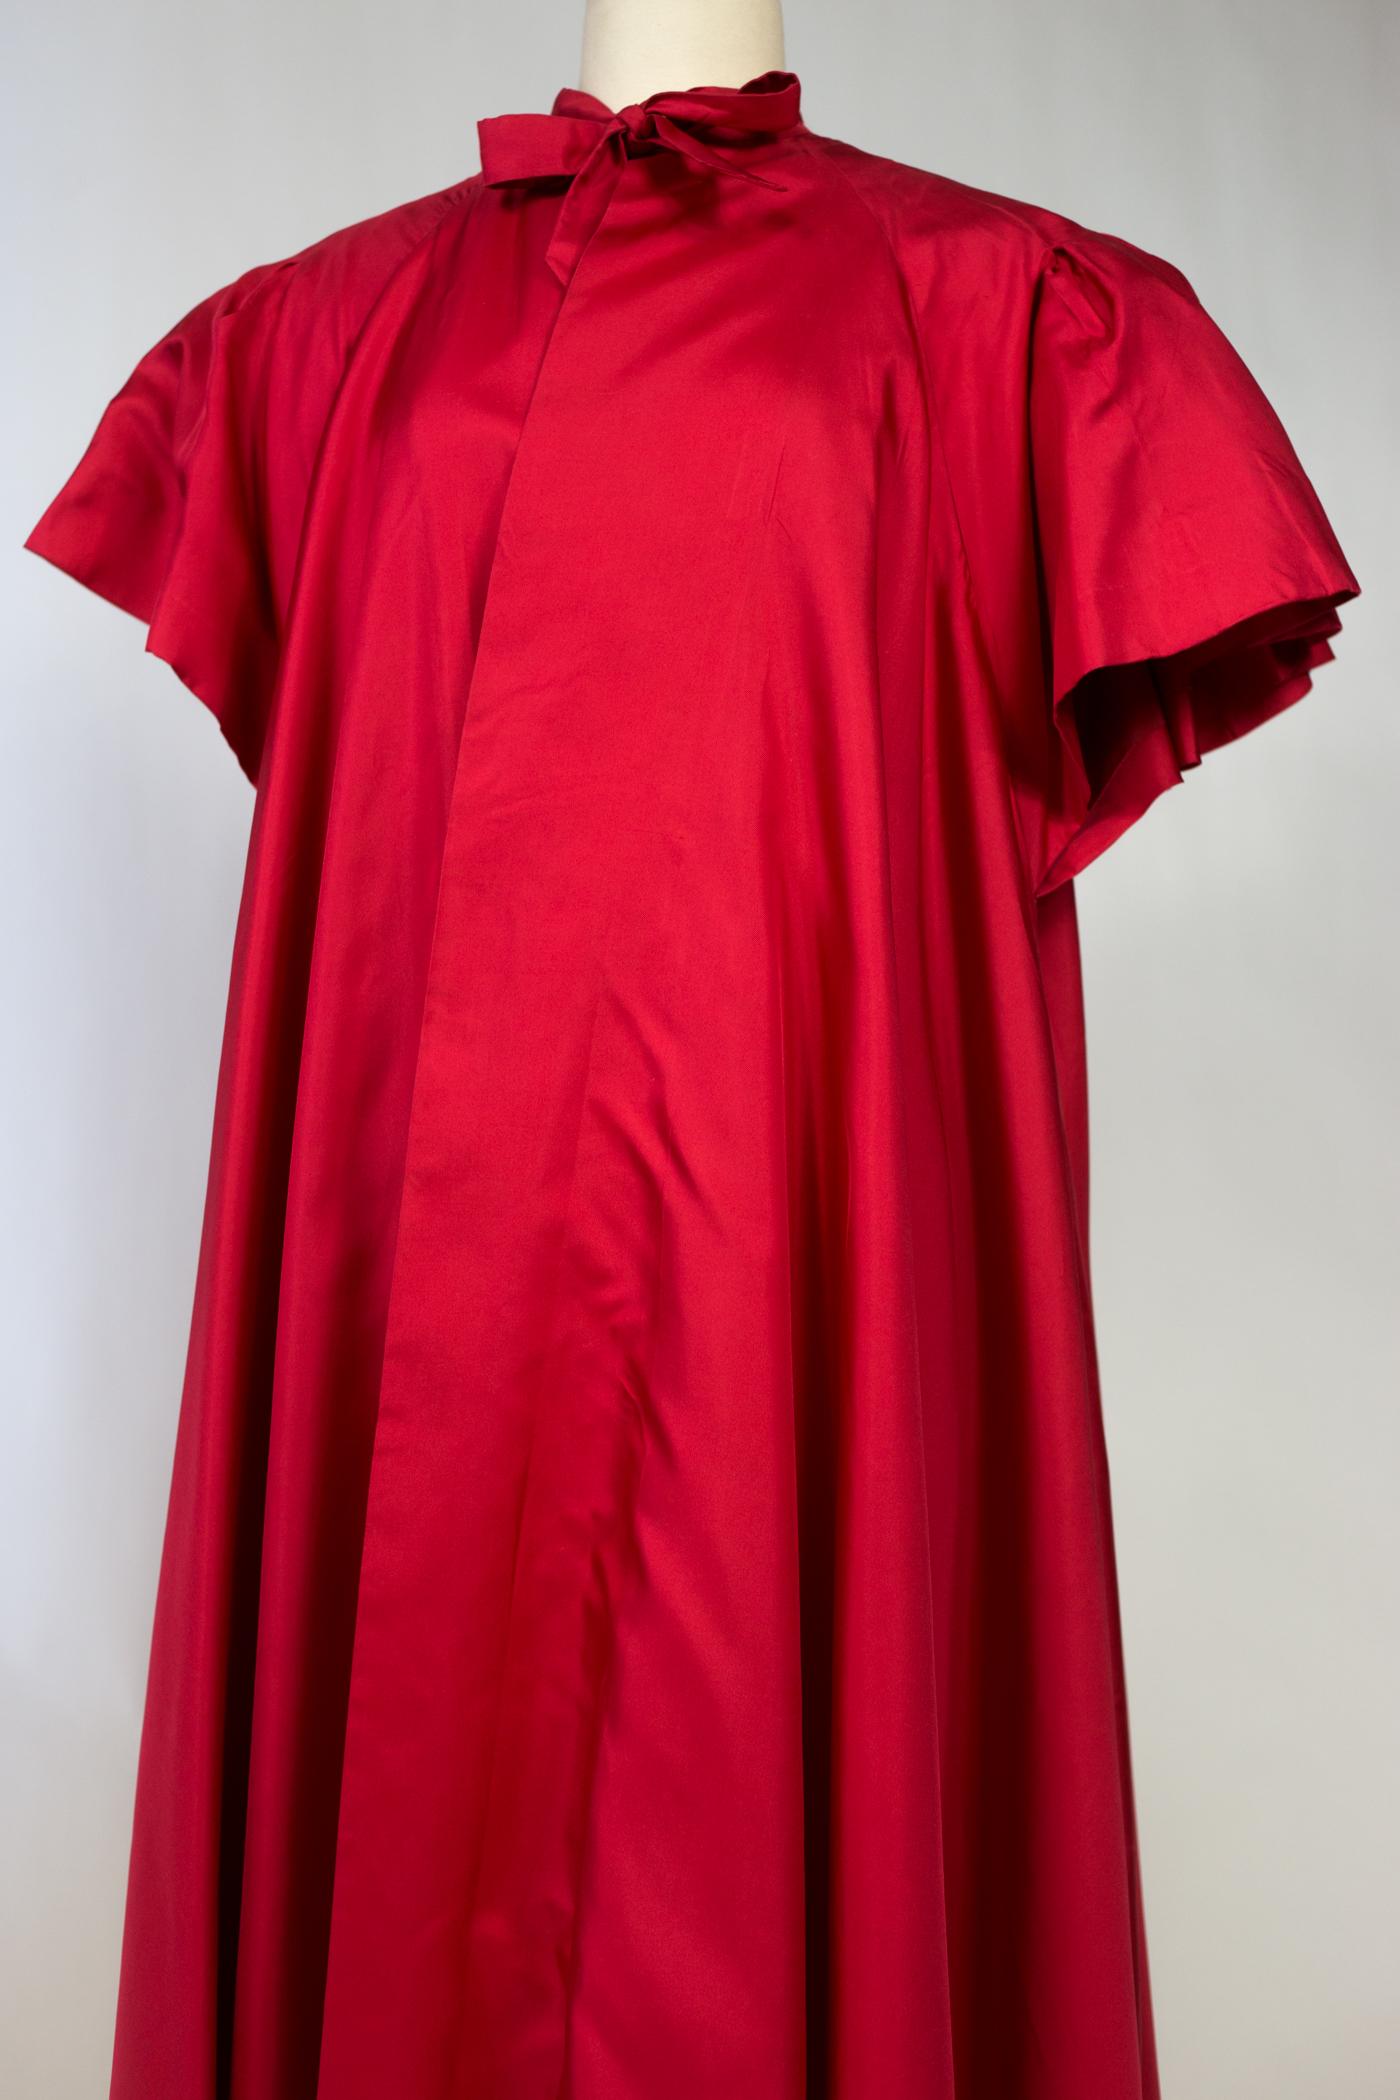 Circa 1955

France

Majestic Cherry red silk twill evening coat by Maggy Rouff Haute Couture dating from the 1950s. Work of sun pleats mounted in godets from the shoulders and widening in volume on the sleeves and the bottom of the coat which